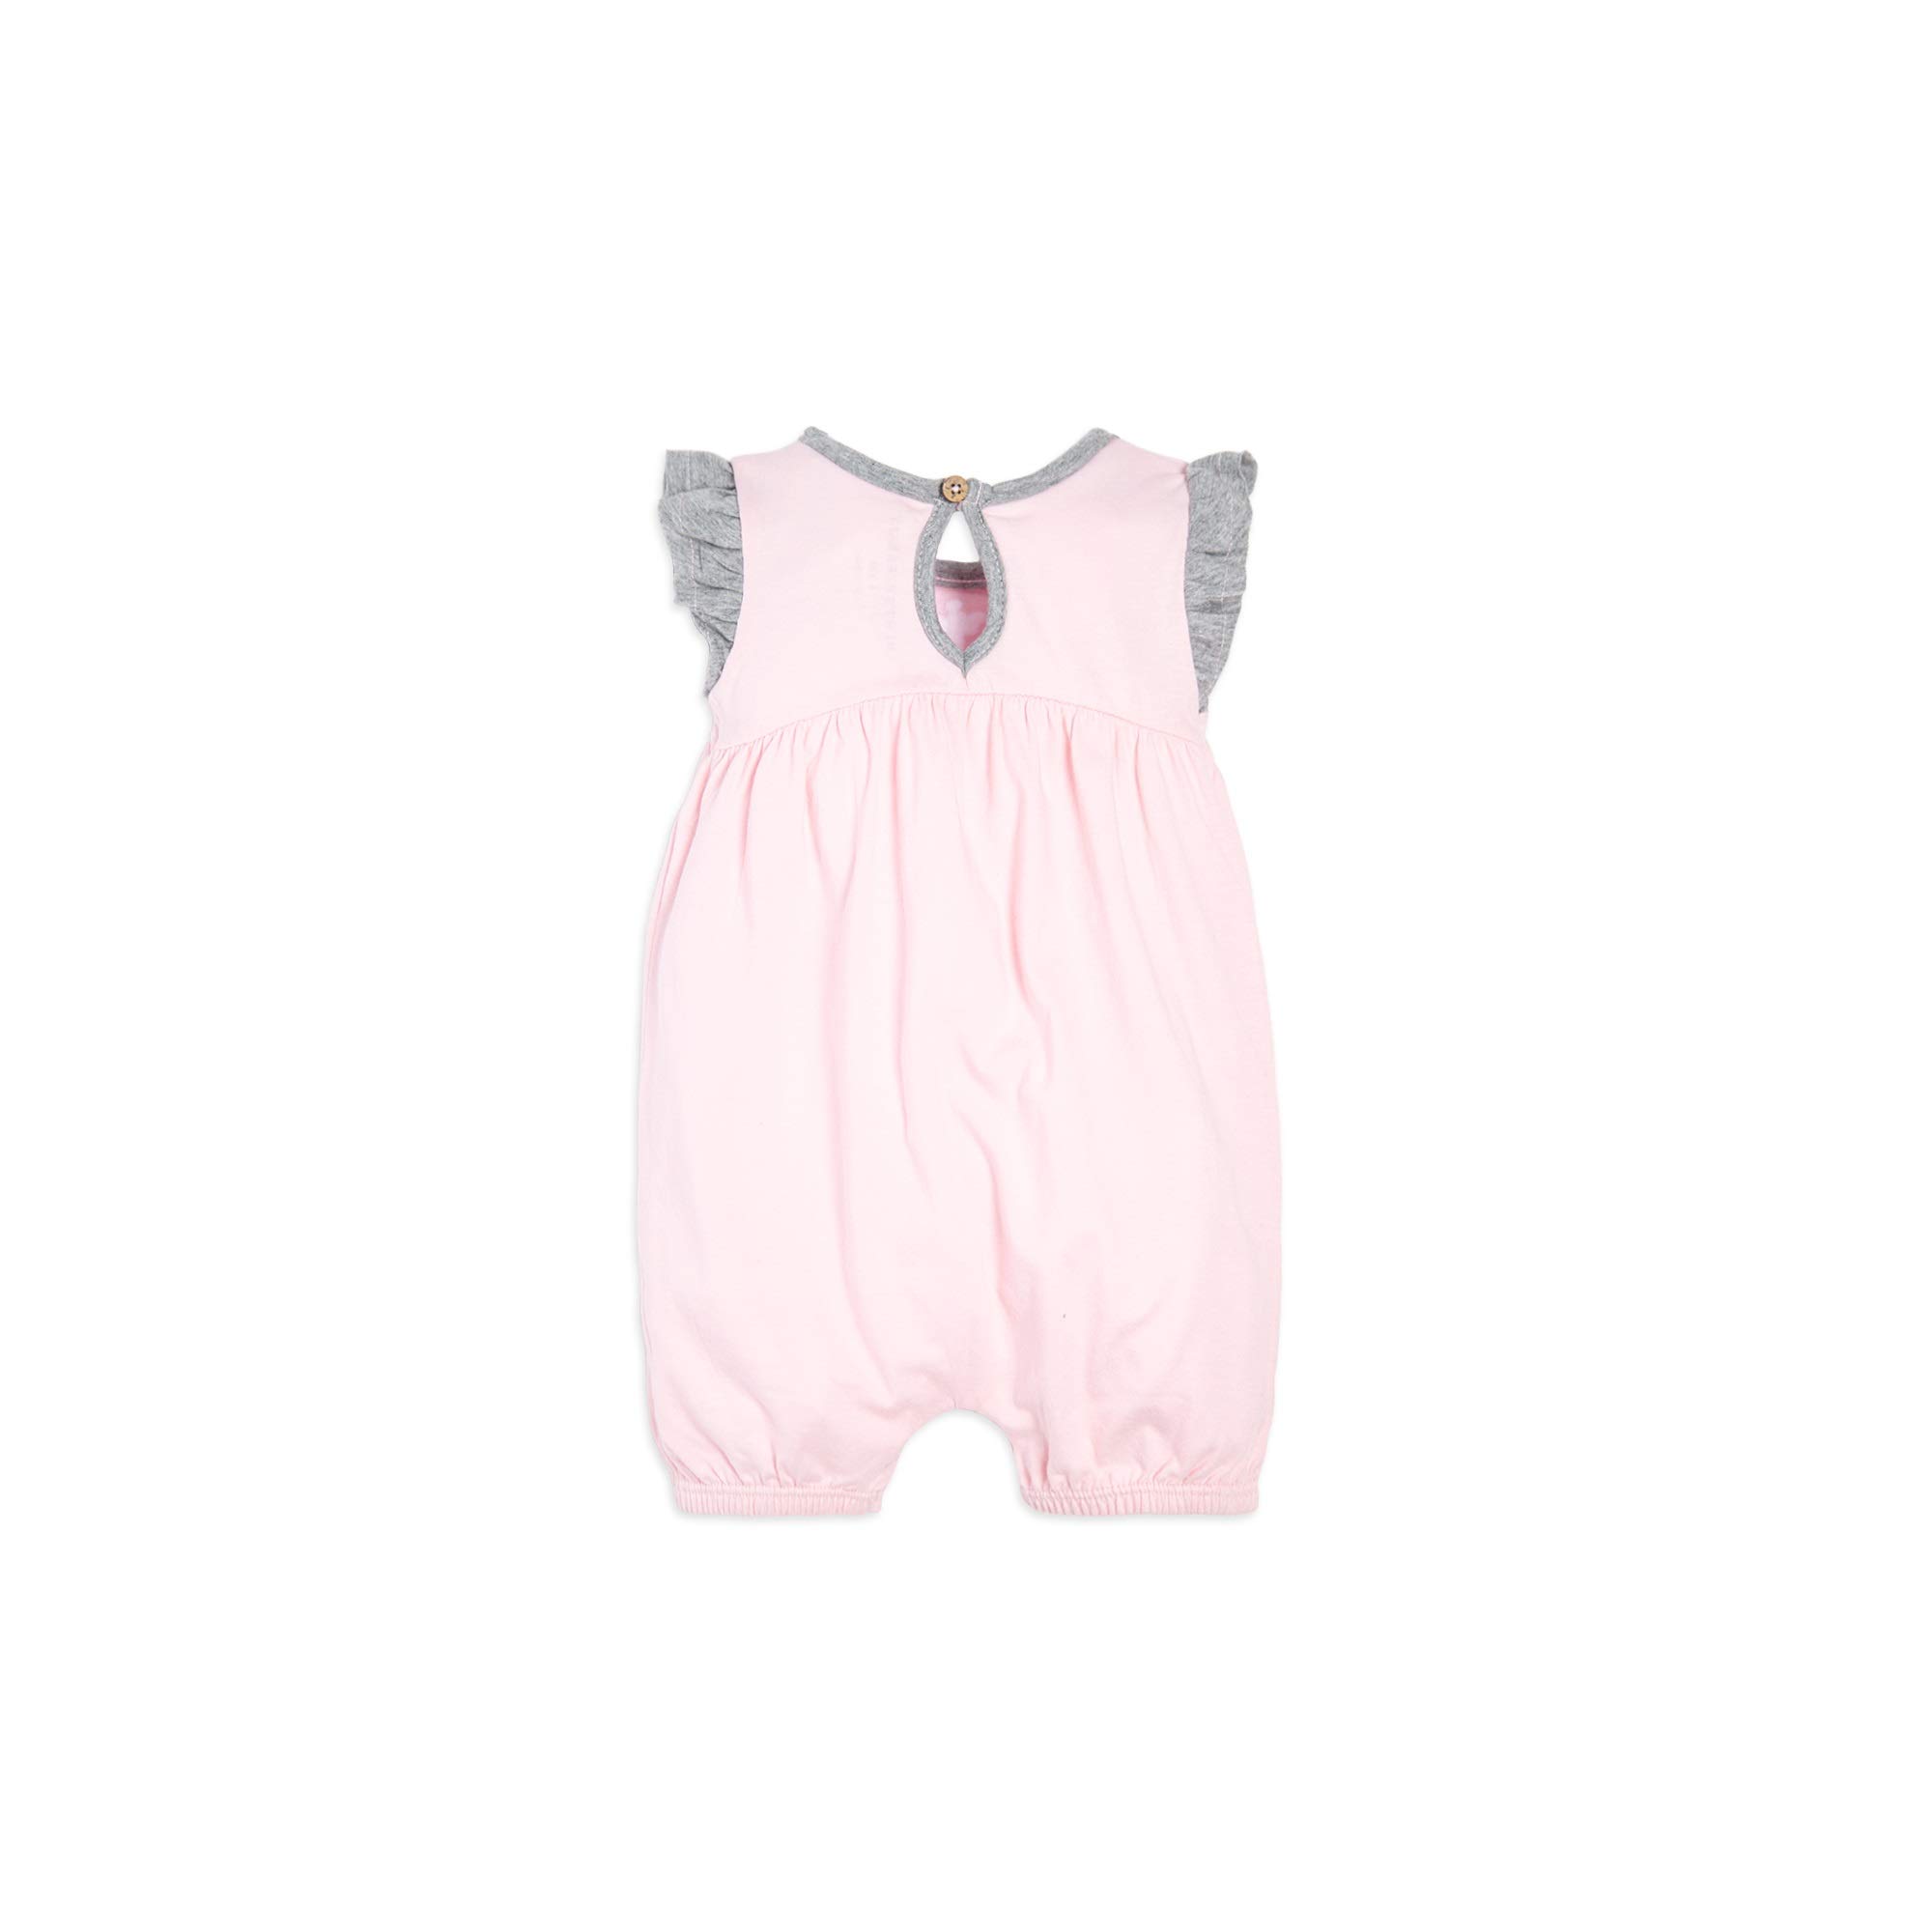 Burt's Bees Baby Baby Girl's Rompers, Set of 2 Bubbles, One Piece Jumpsuits, 100% Organic Cotton